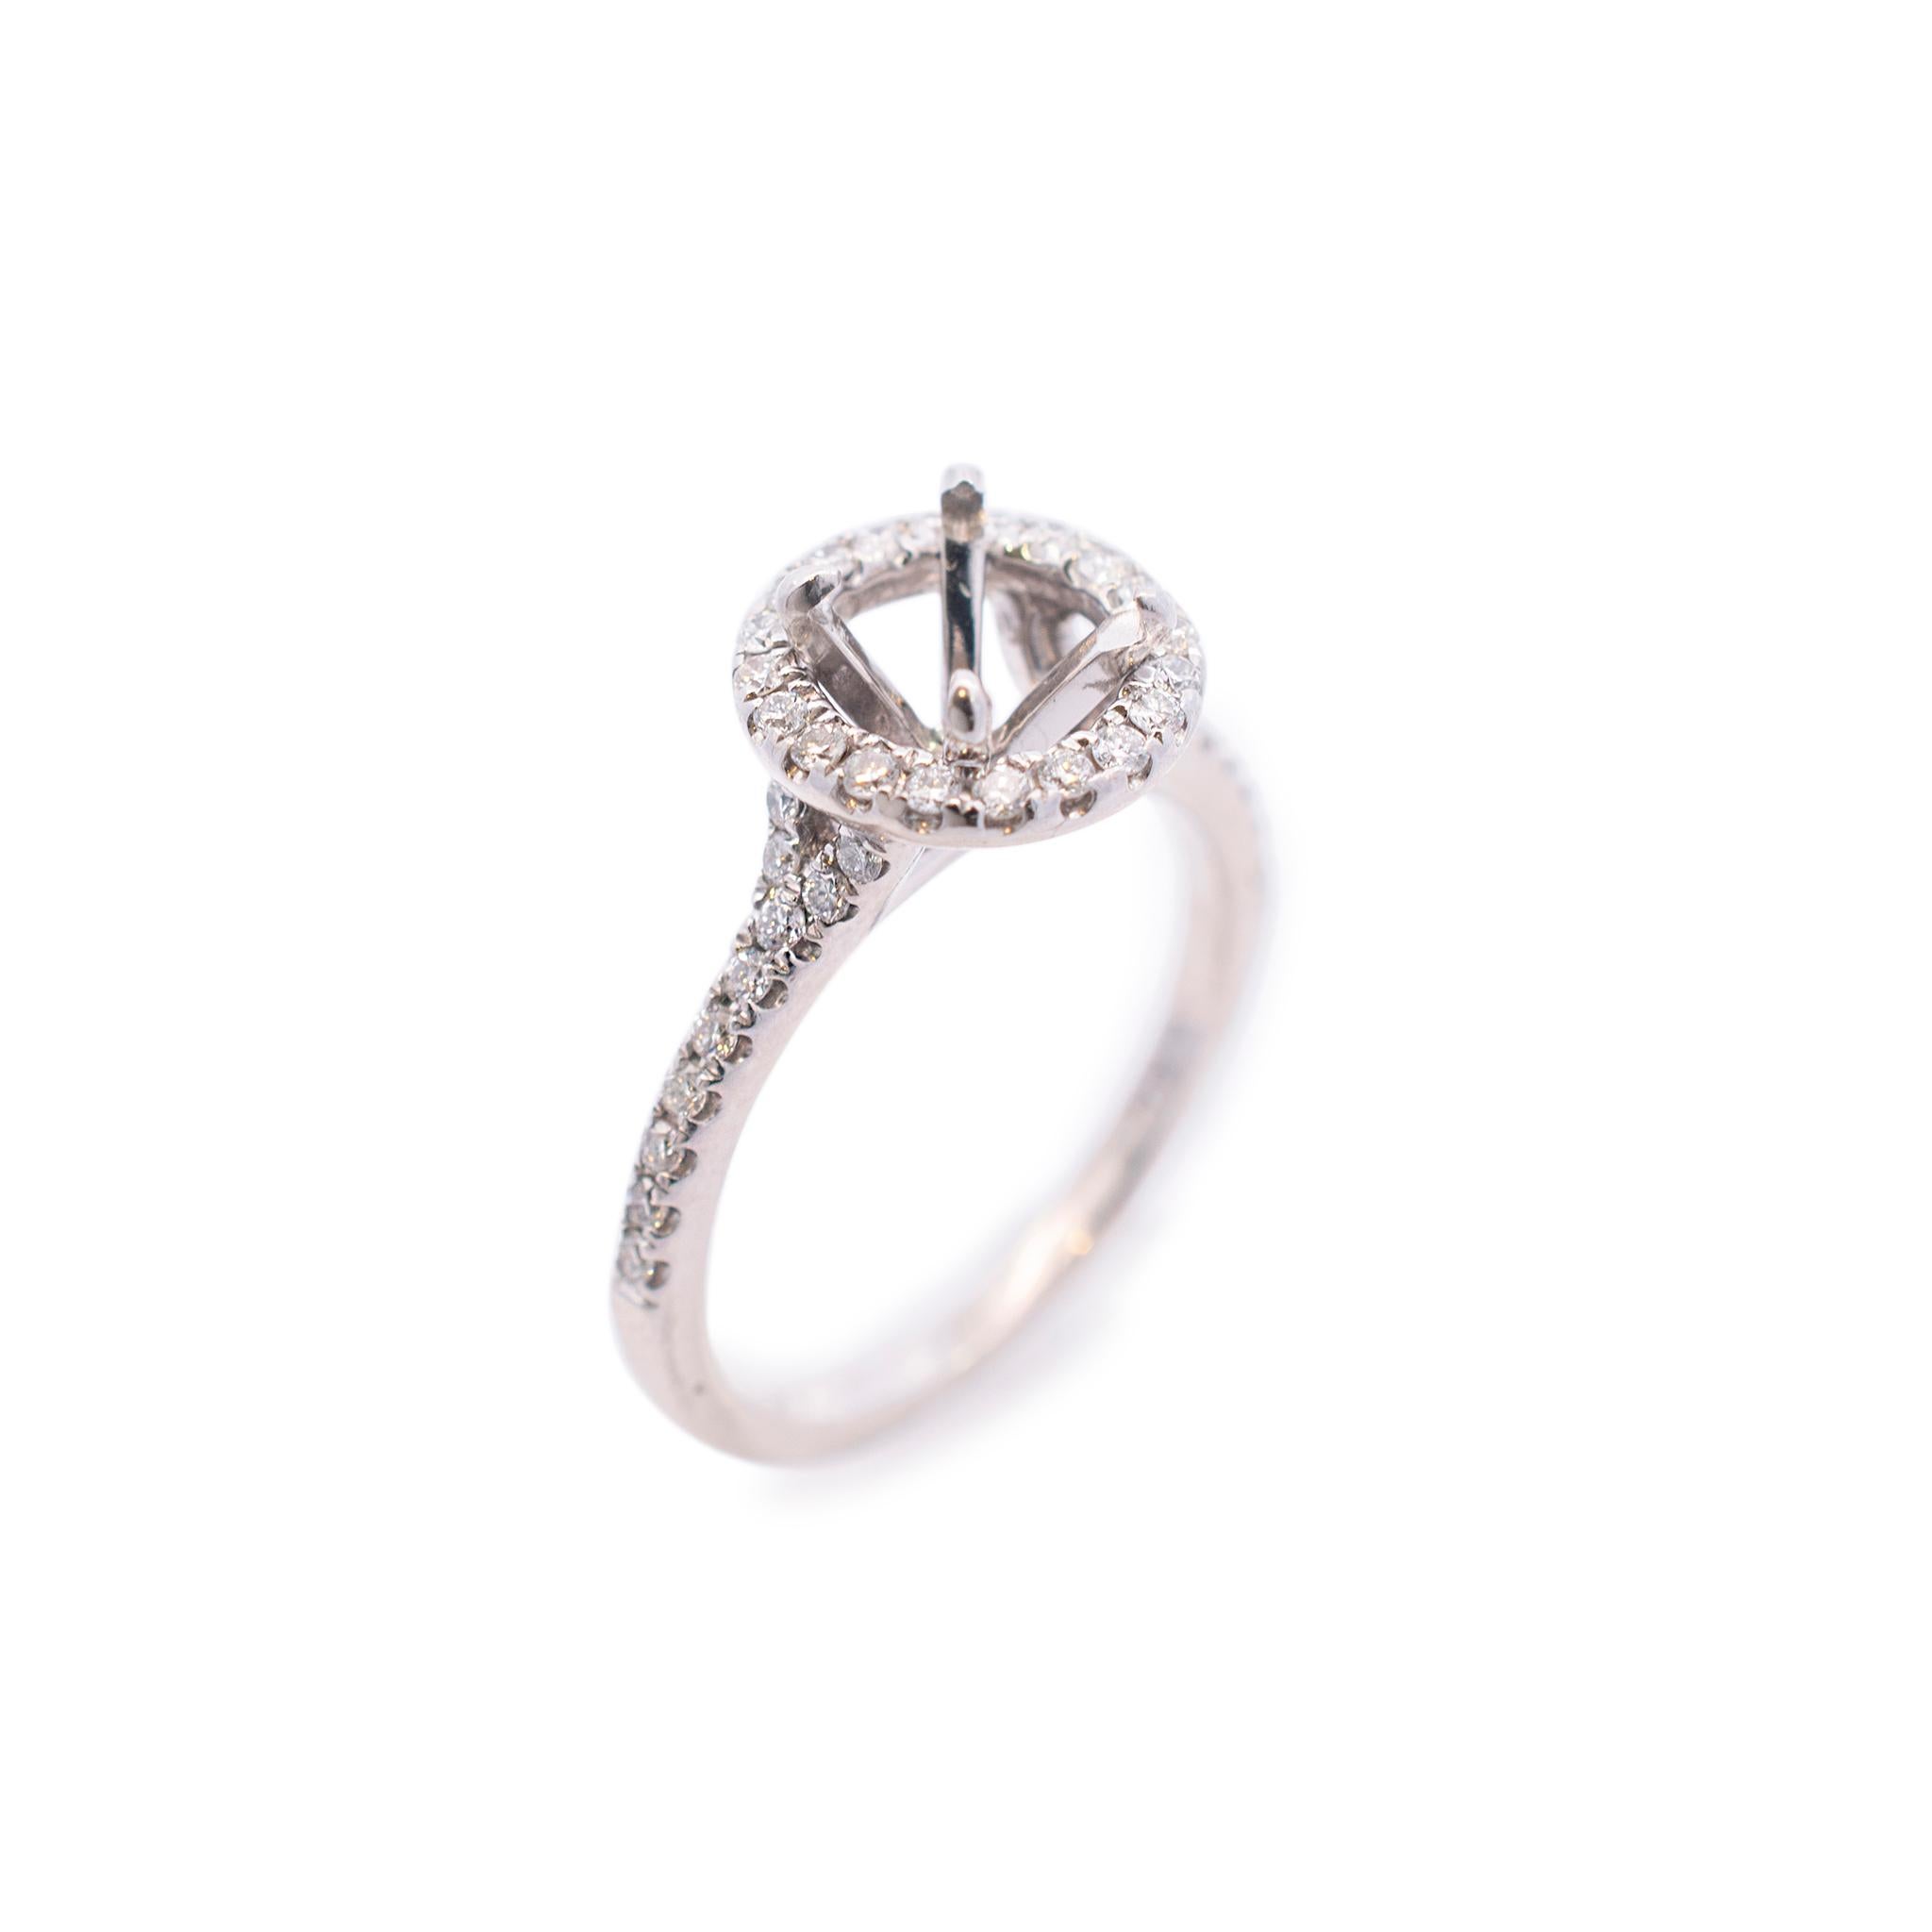 One ladies custom made polished rhodium plated 14K white gold, diamond engagement, halo, semi-mount ring with a half round shank. The ring is a size 6.25, is 1.60mm thick and measures approximately 10.26mm tapering to 10.16mm in width and weighs a